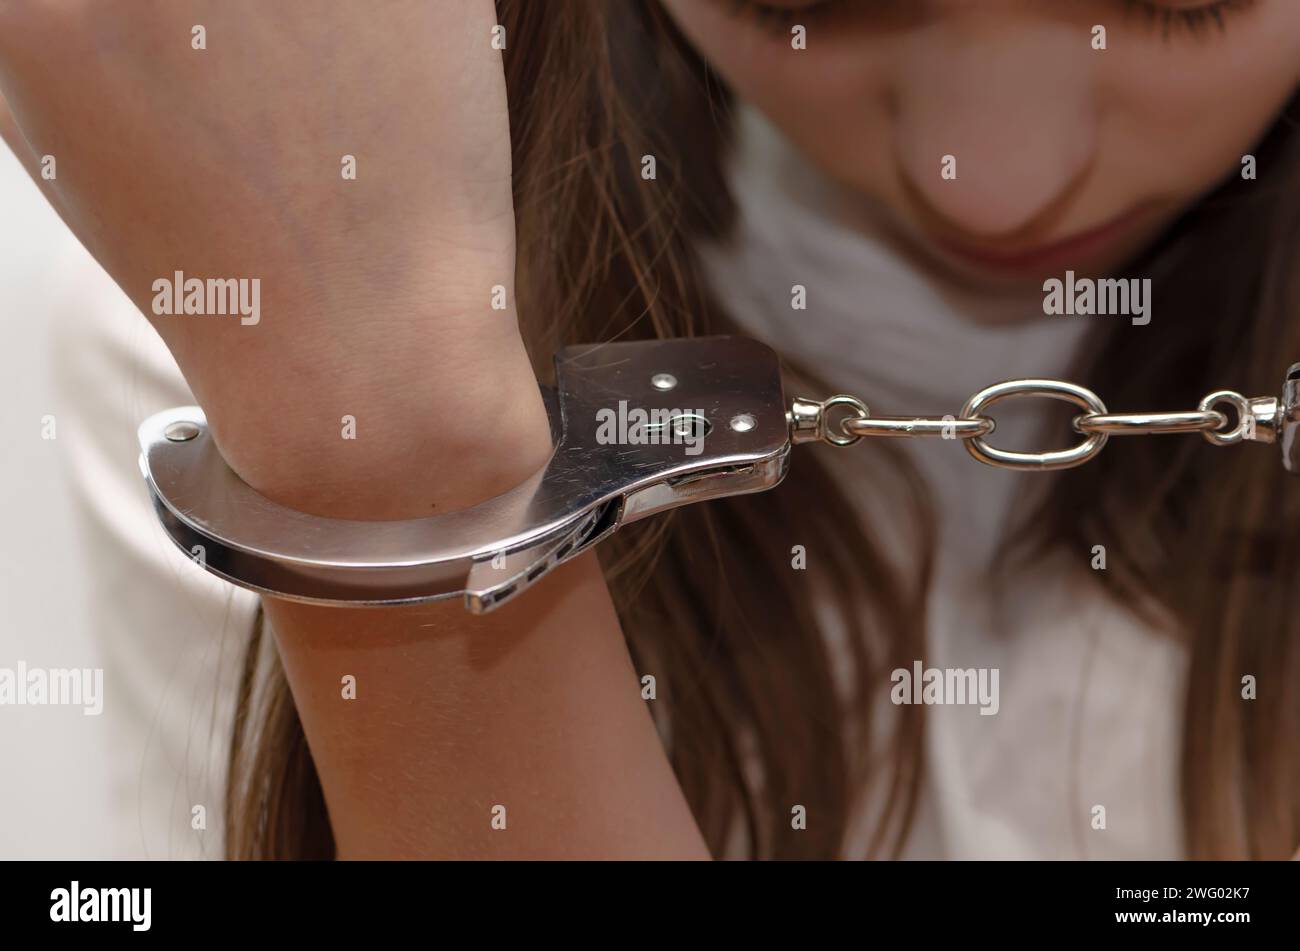 A teenage girl looks at her handcuffed hands. Concept: Juvenile delinquent, criminal responsibility of juveniles. Stock Photo